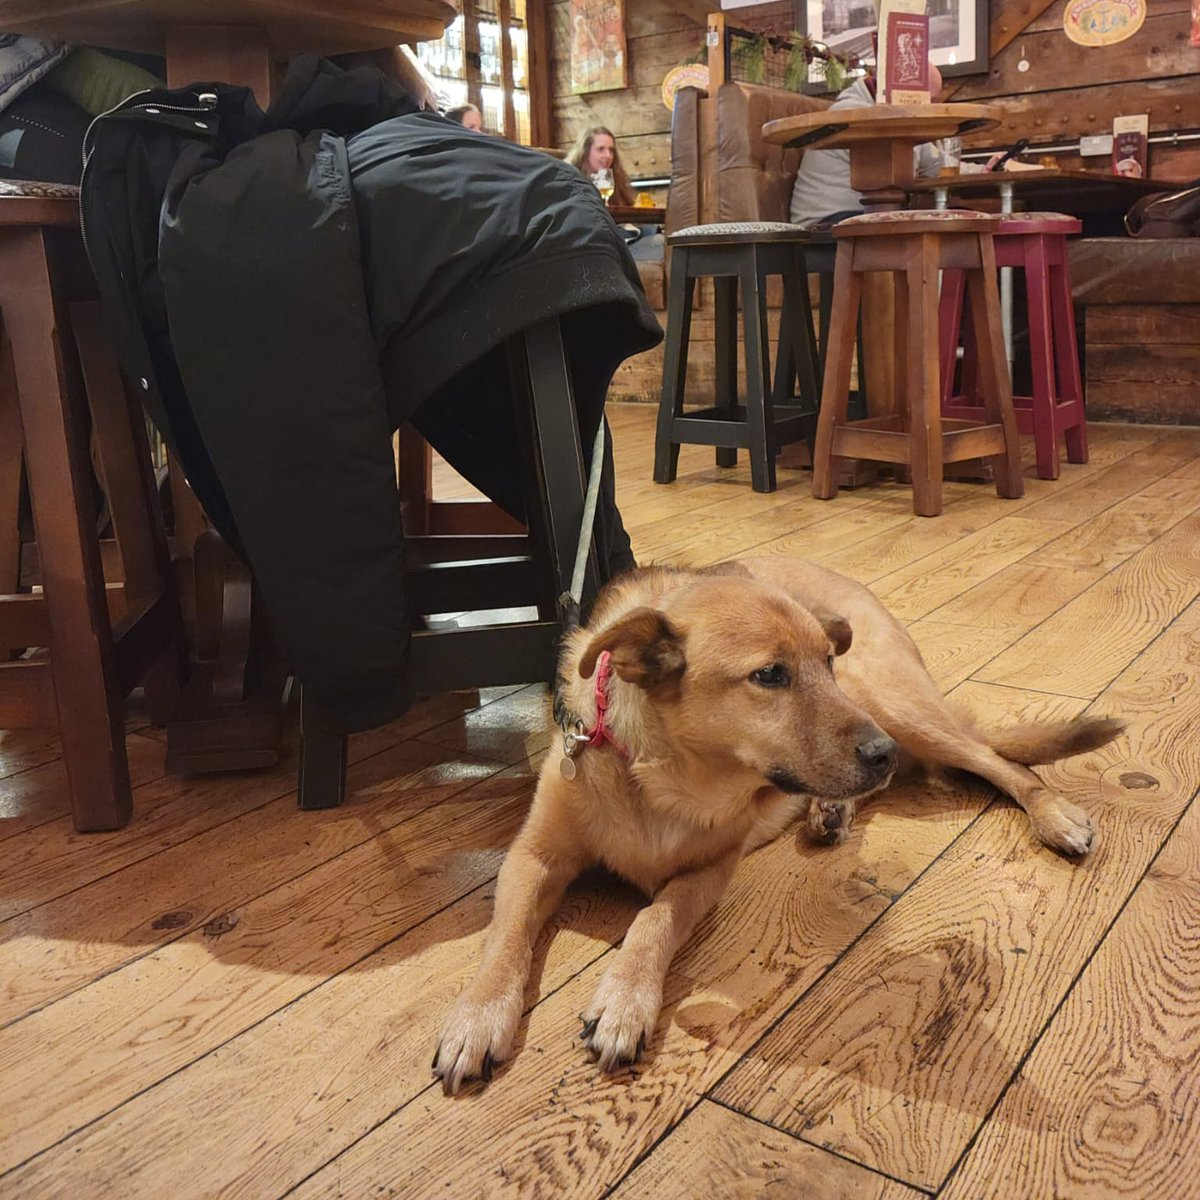 It's a Dogs world here at HOS Bring them along for a pint and a treat.

#hos #fizz #bottomless #didsburypub #dogfriendly #pubfood #cocktails #camerons #beavertown #yeastieboys #shindigger #beerlovers #gamesnight #paulaner